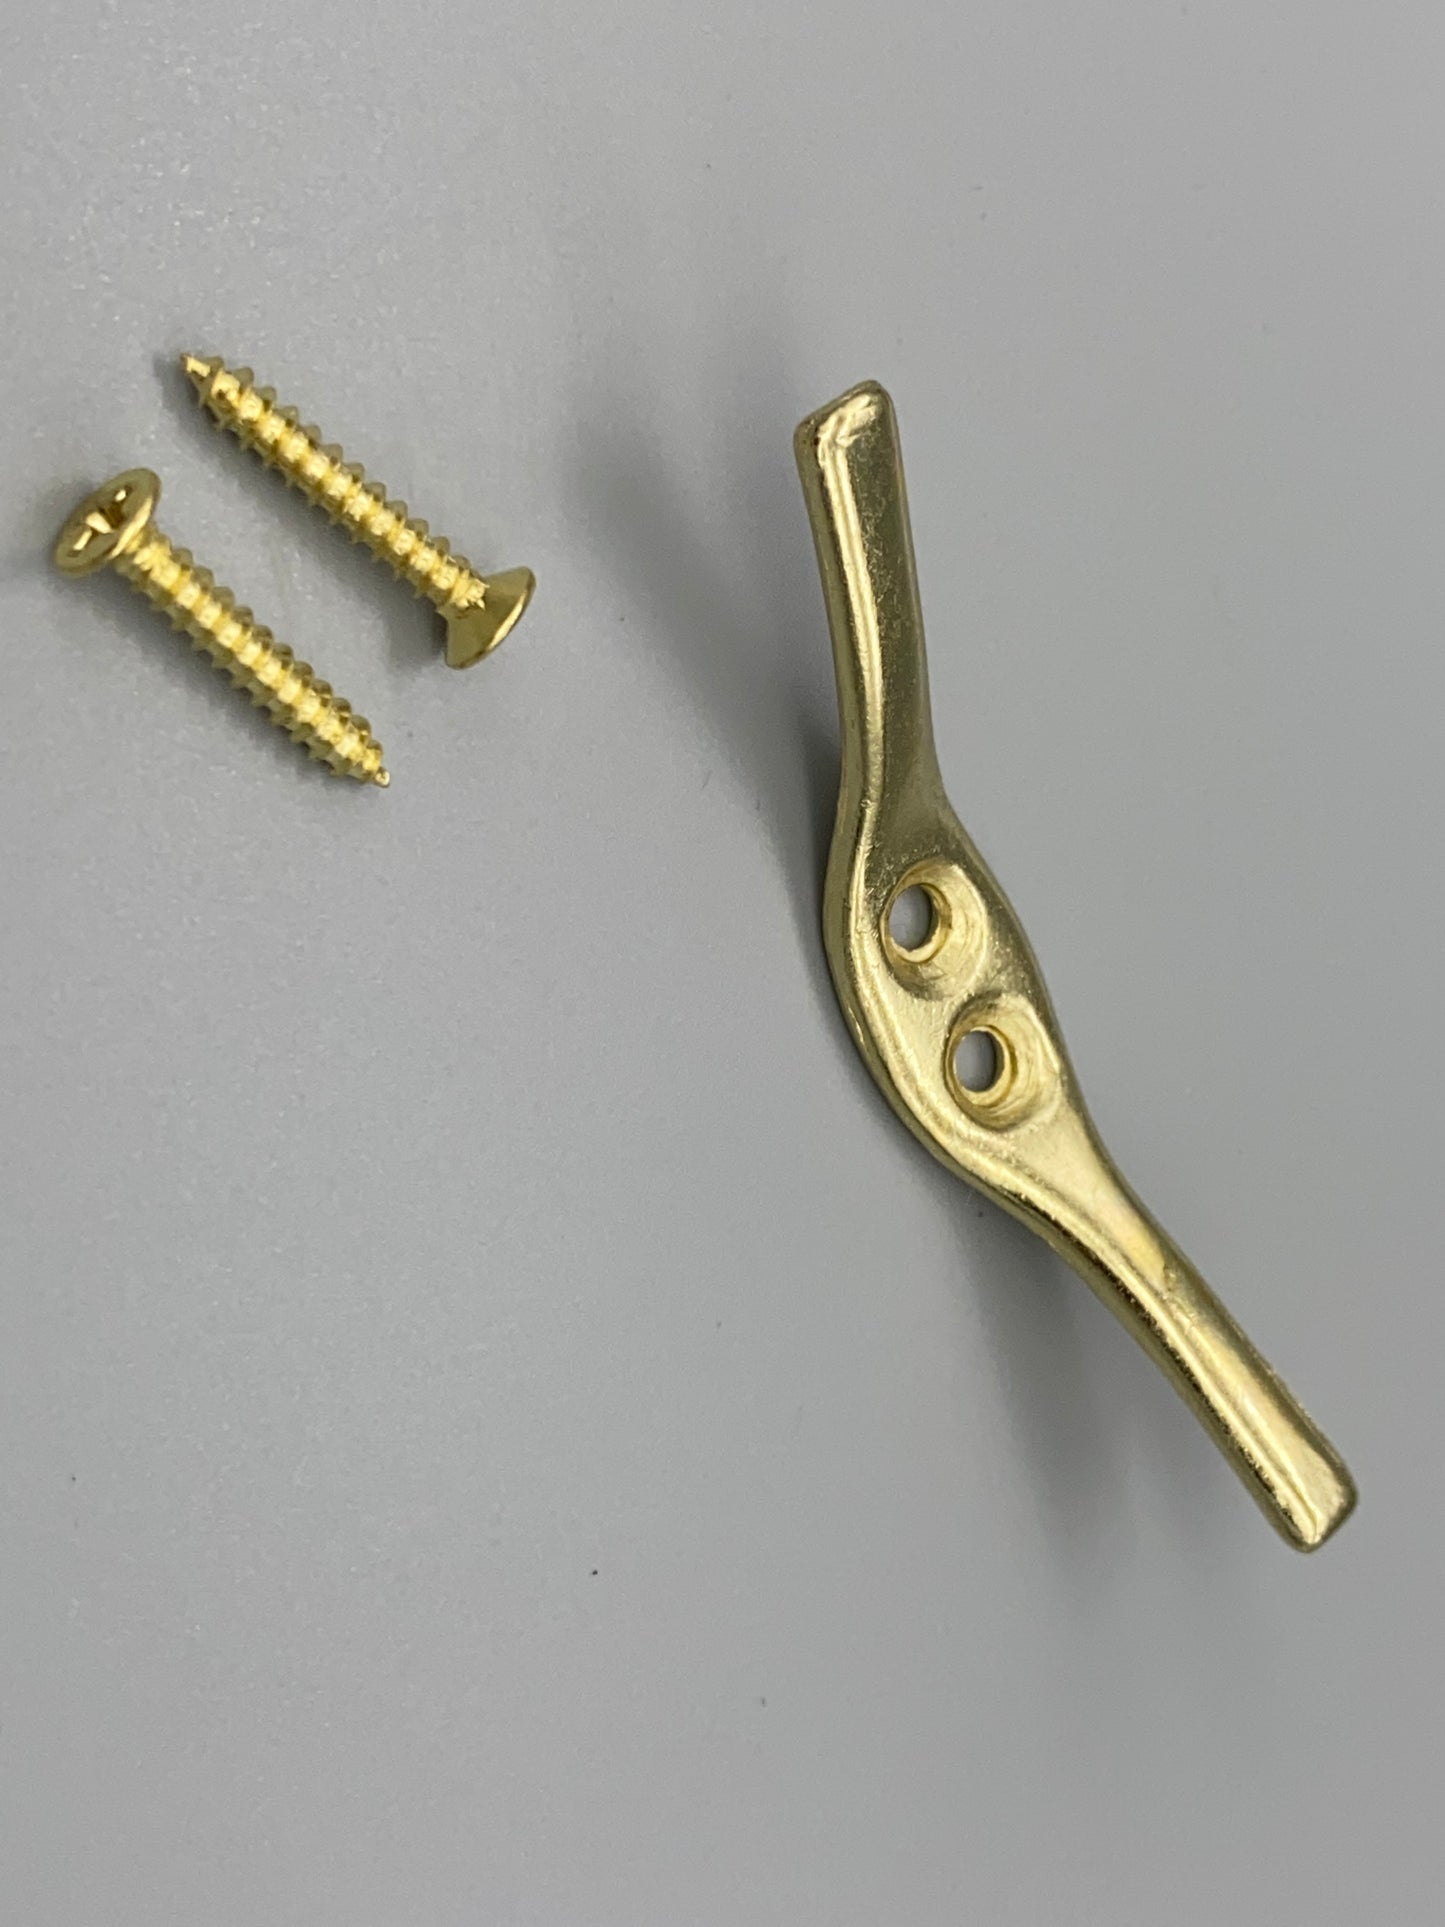 Metal Gold Cord Cleat Safety Device - With Screws - Pack of 3